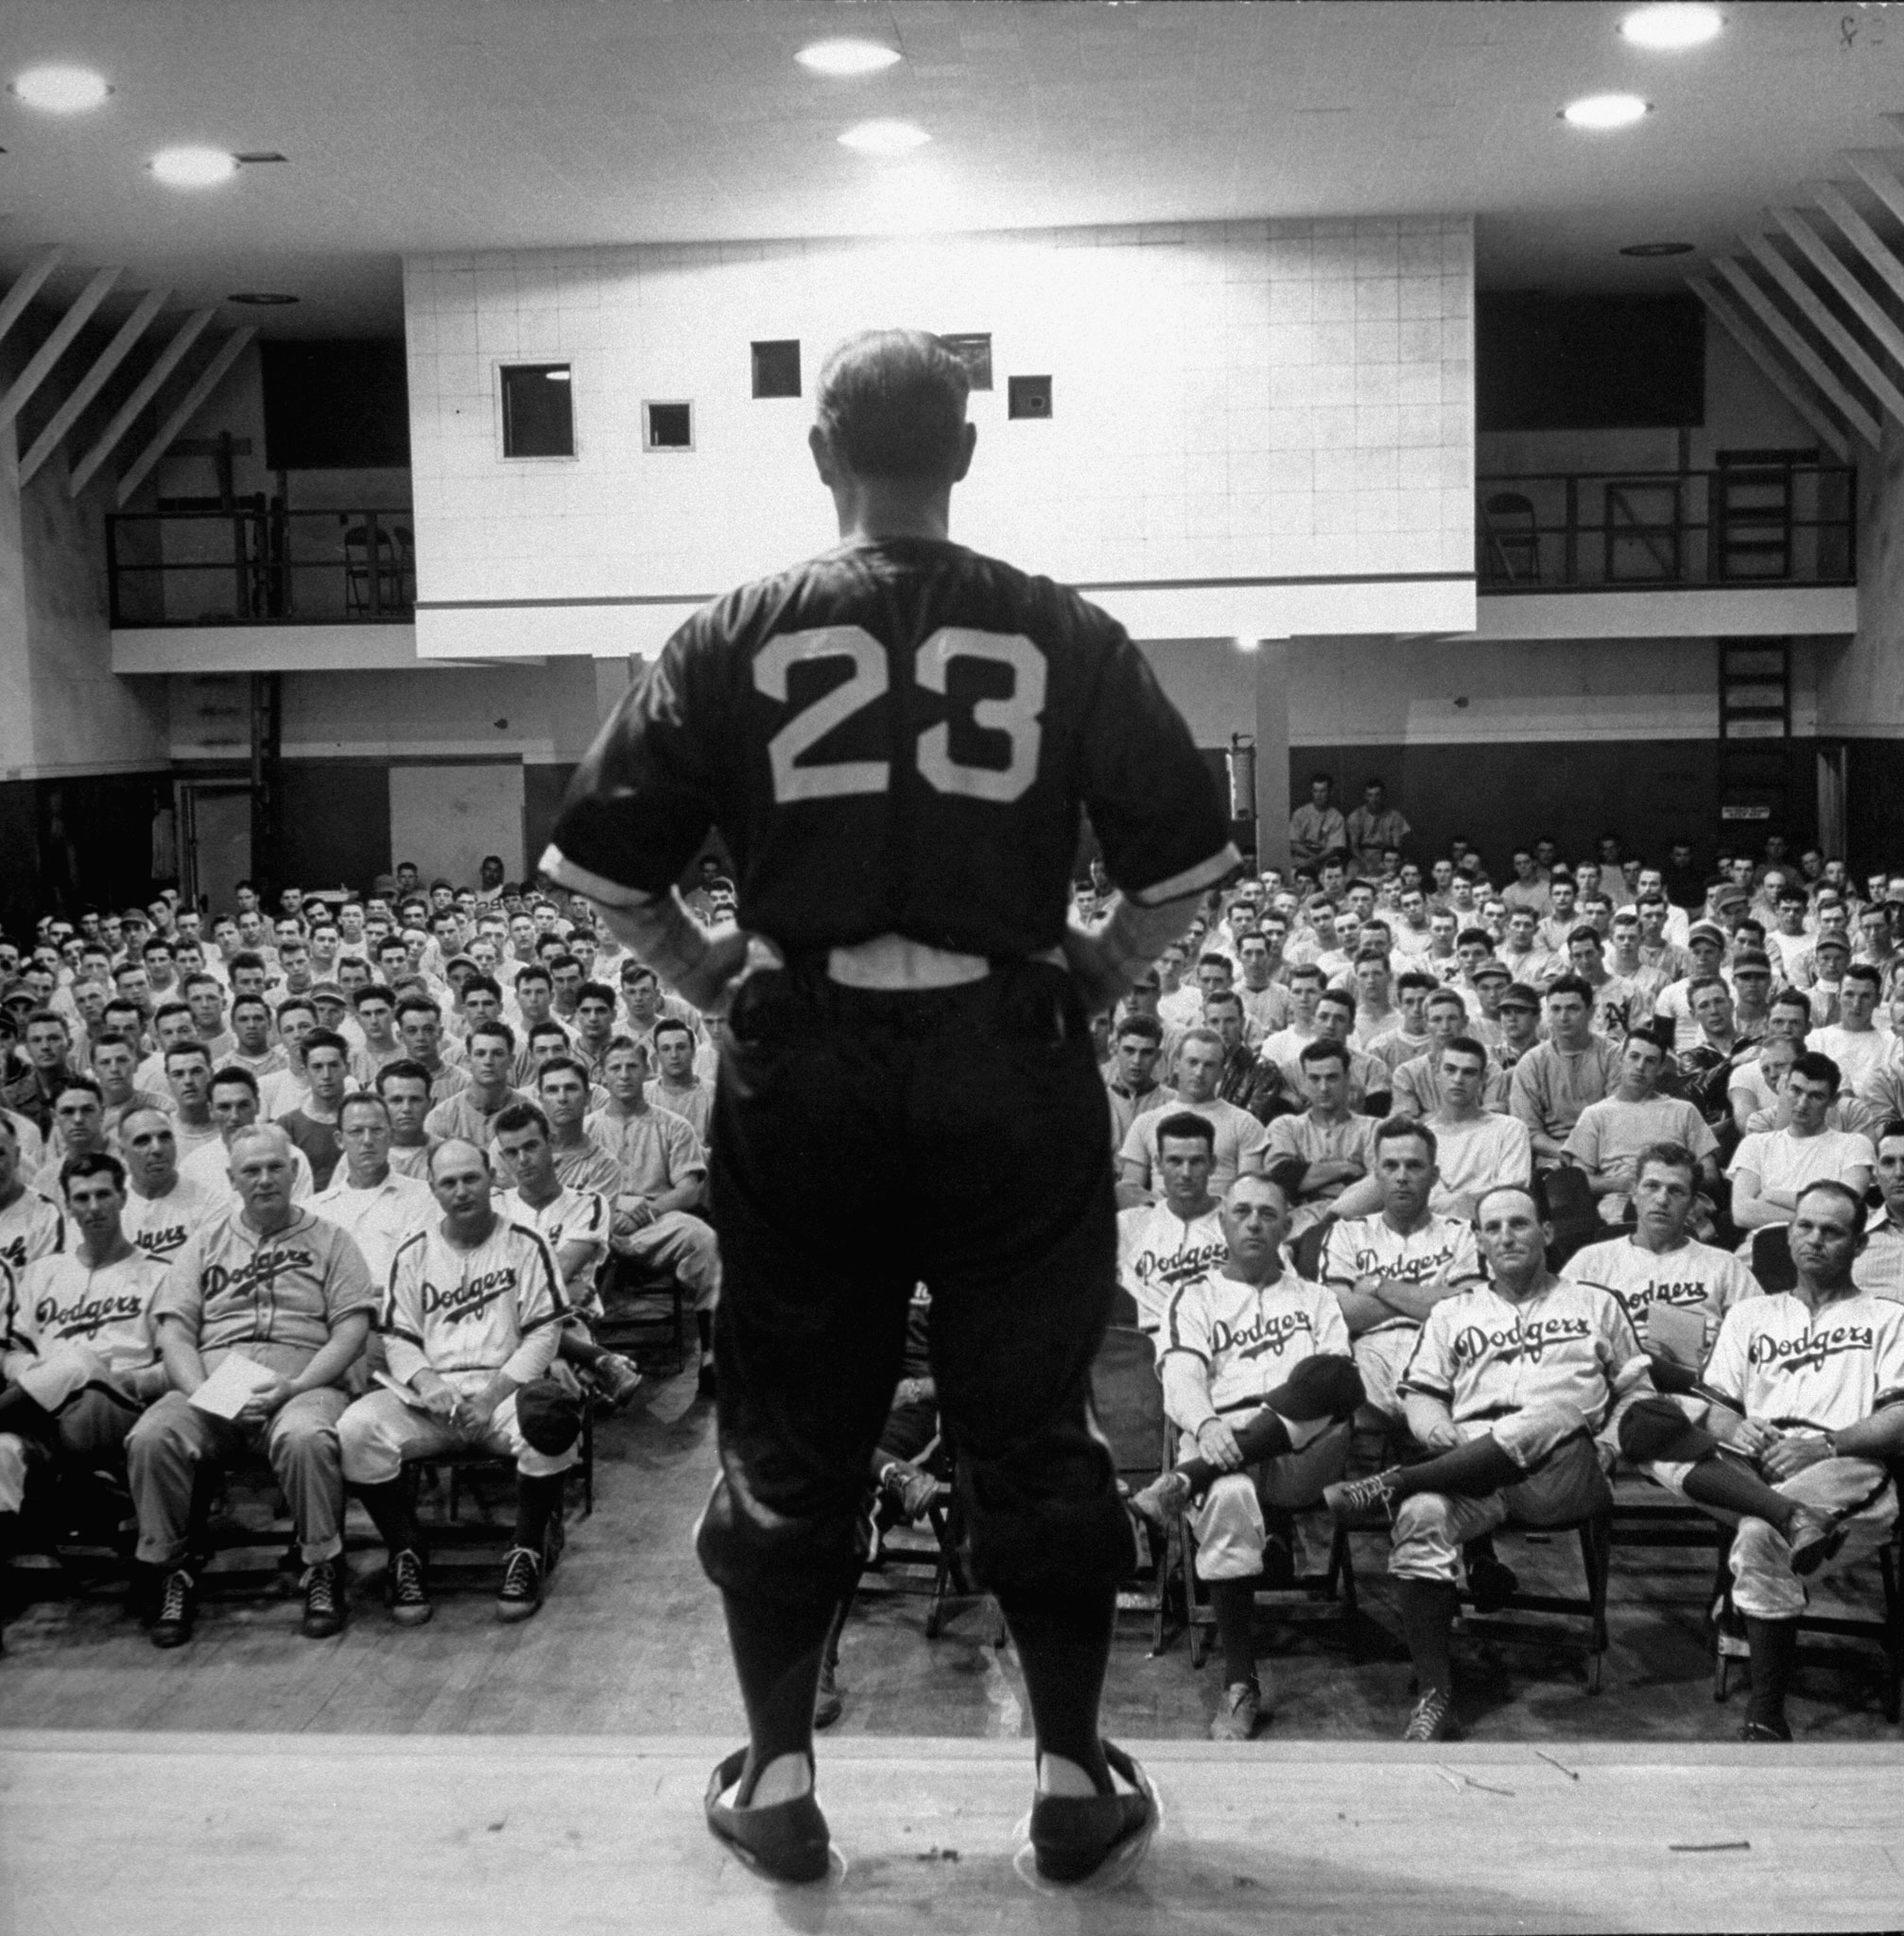 Fresco Thompson, a former National League infielder, talks to Dodger coaches and prospects, Dodgertown, Fla., 1948.